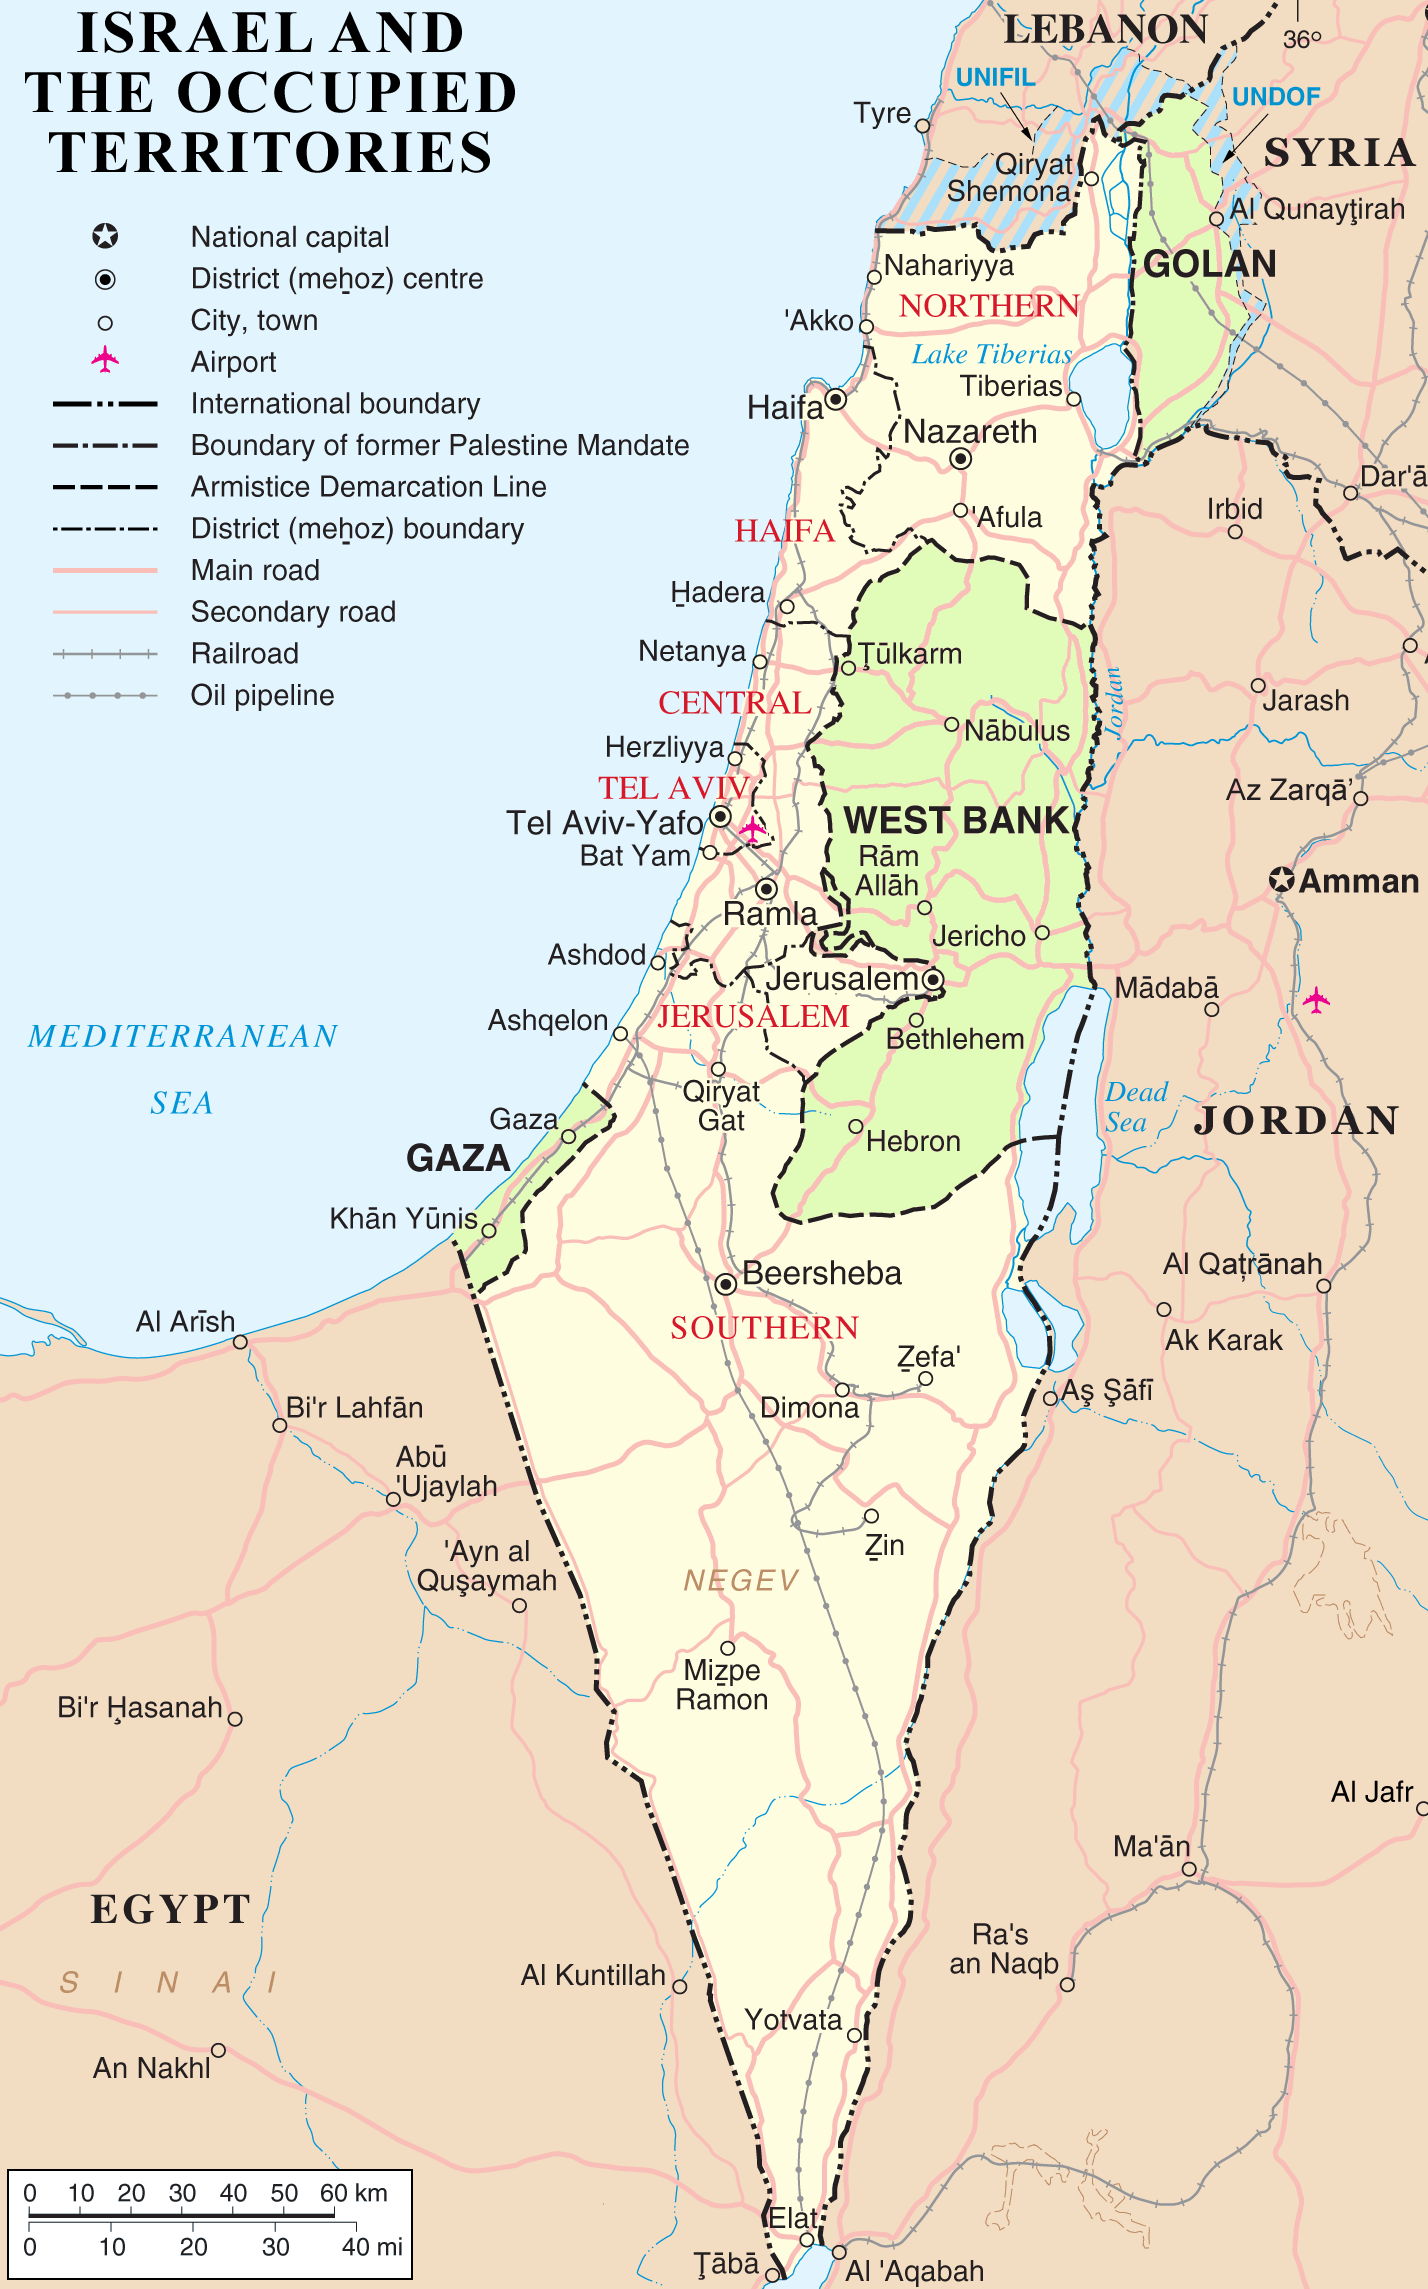 Israel and occupied territories 2007